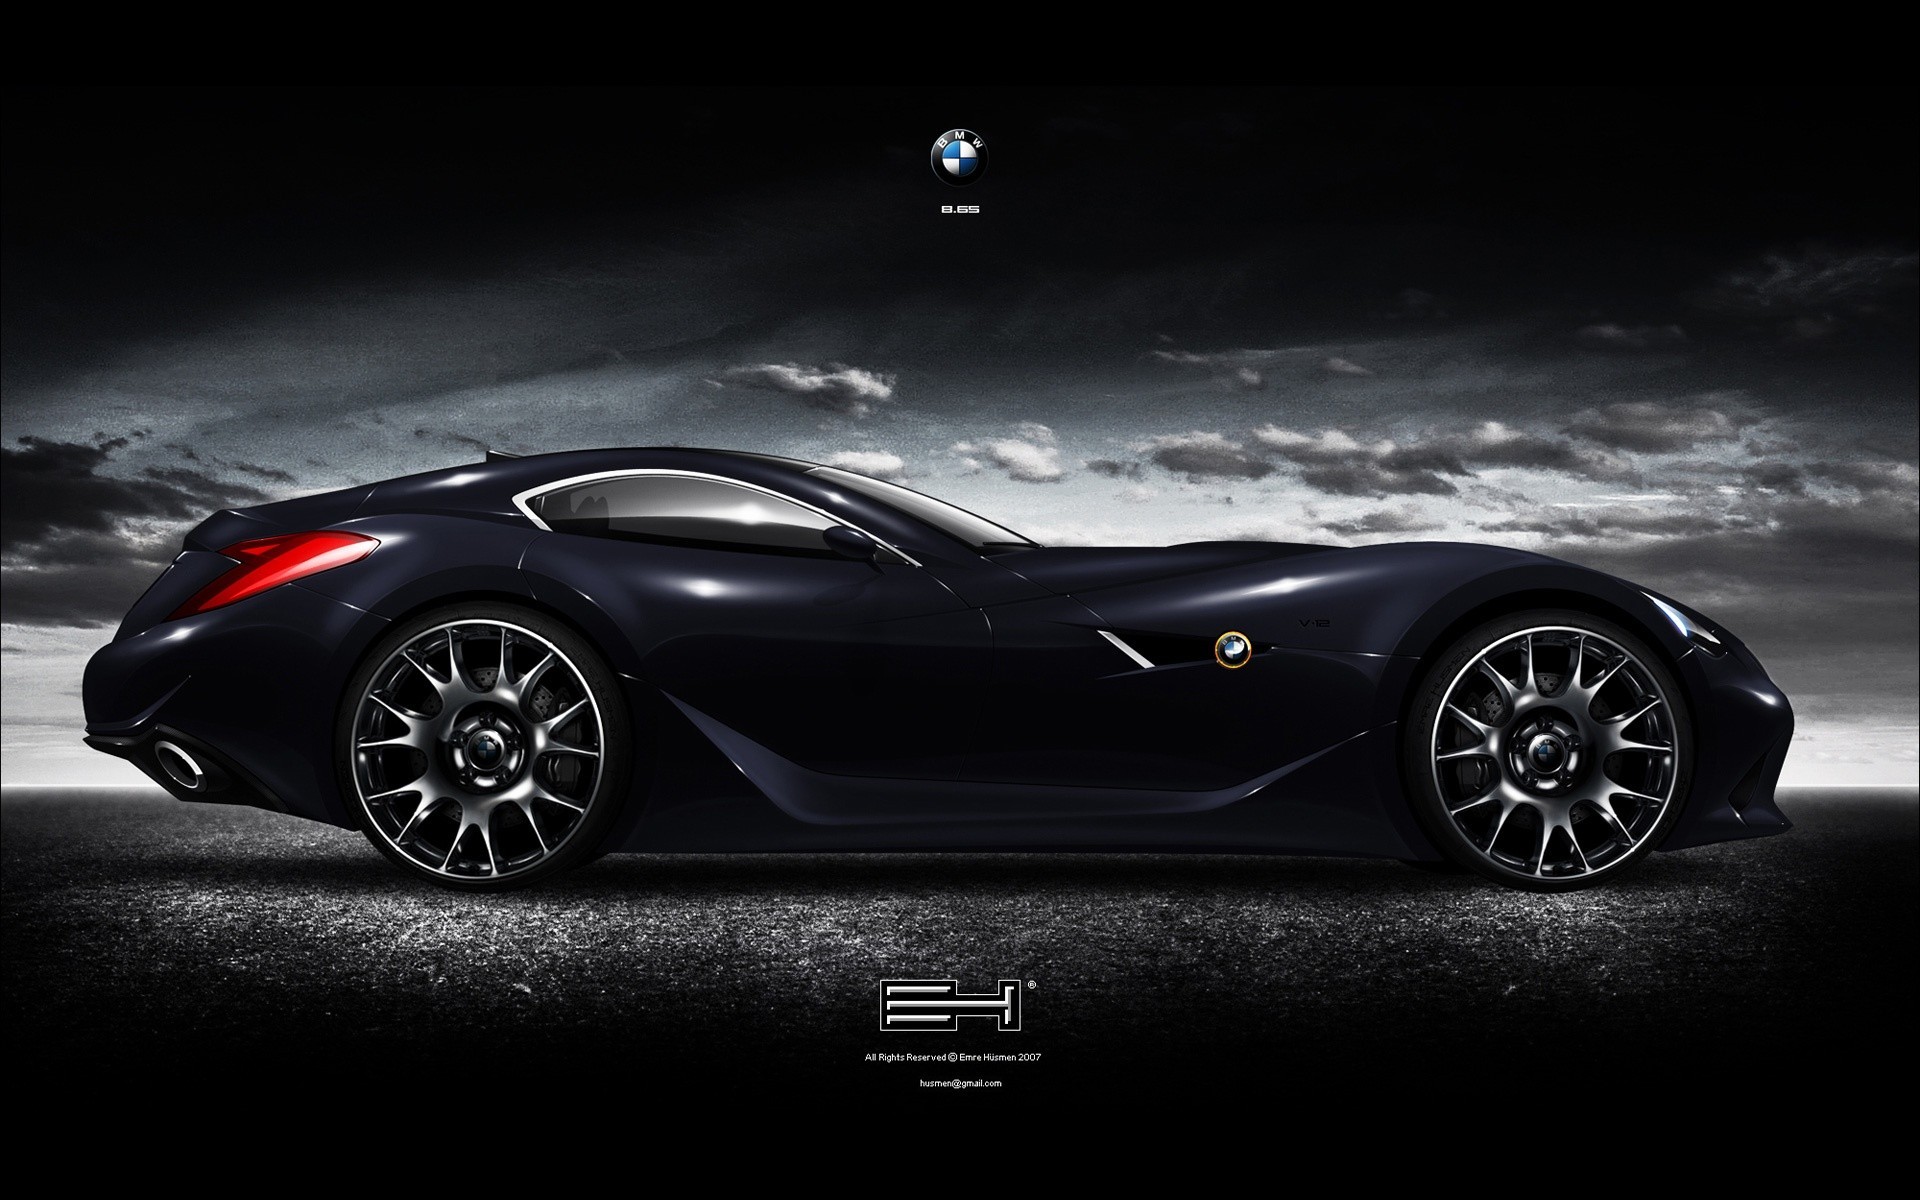 1920x1200 Search Results for “bmw supercars wallpapers” – Adorable Wallpapers